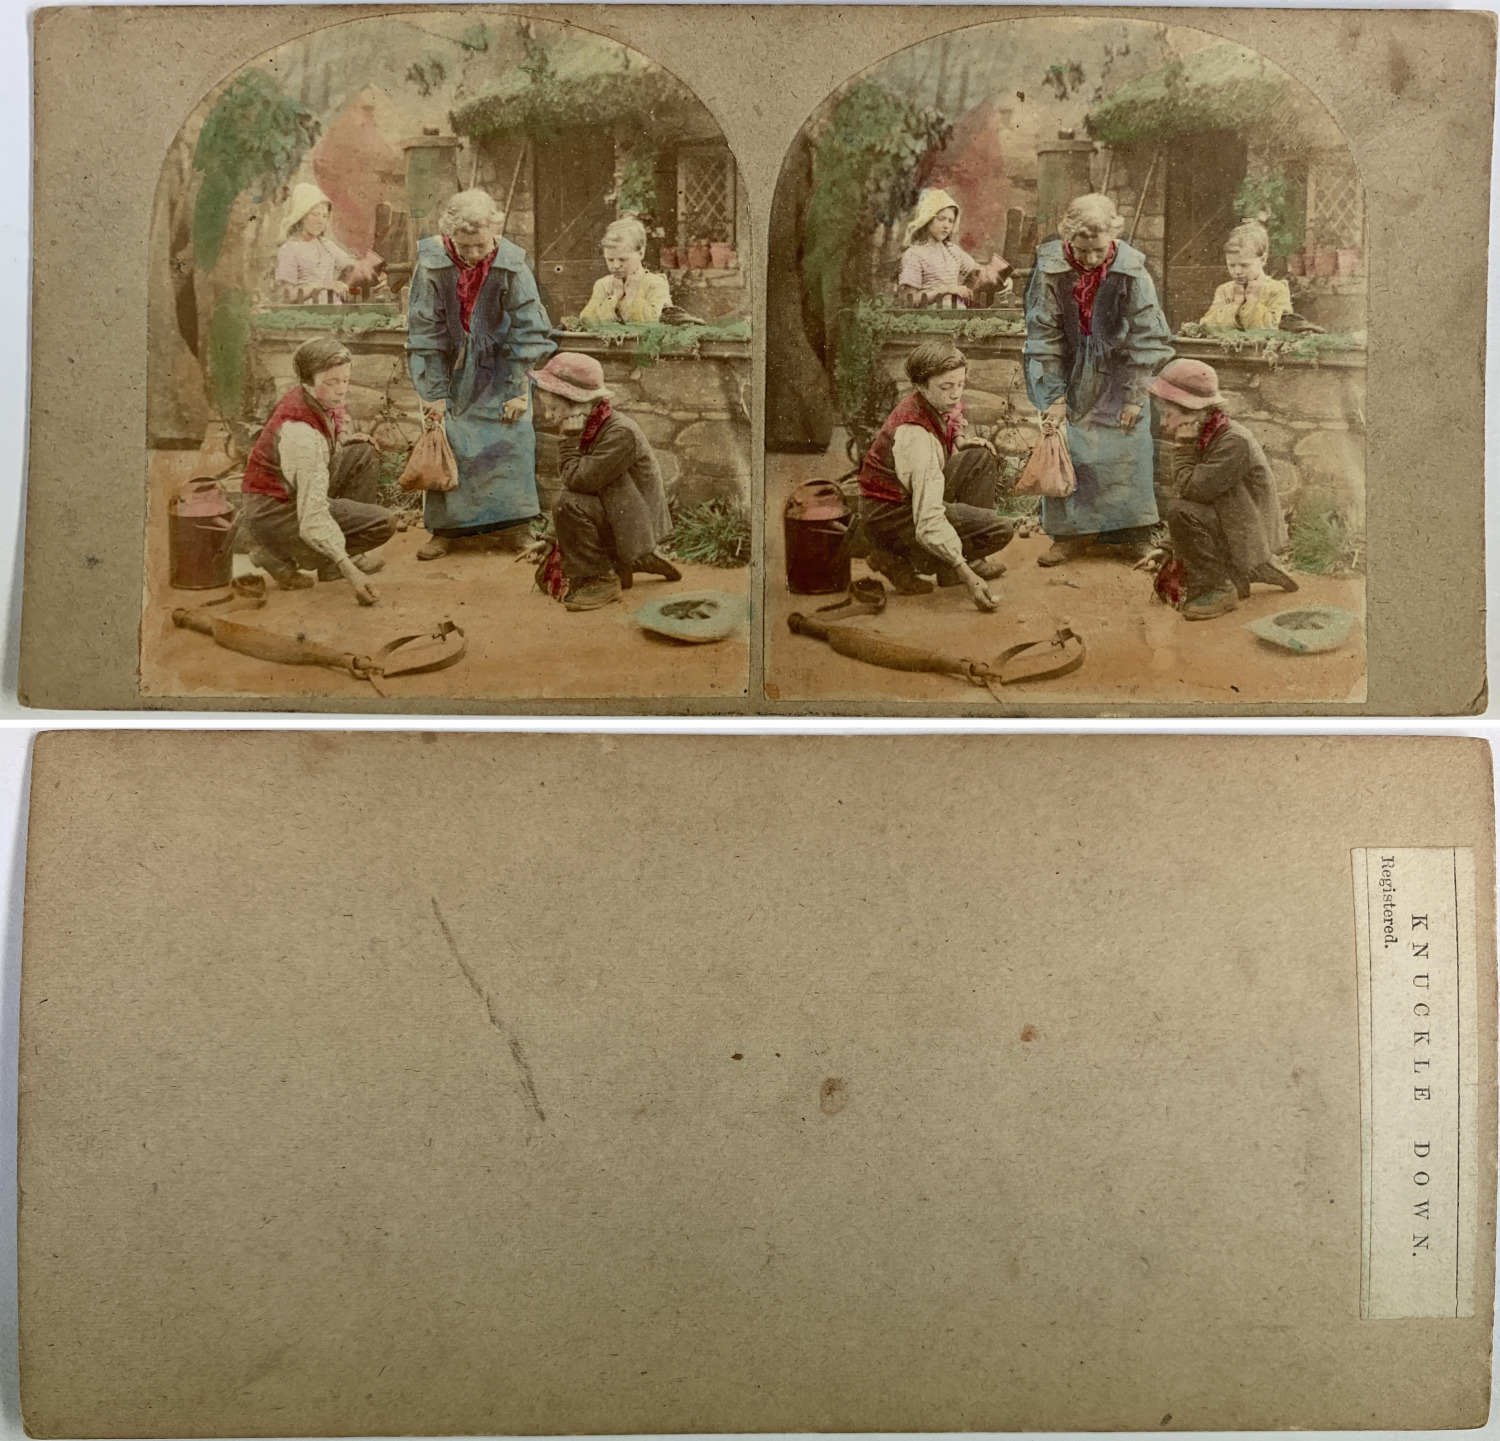 Stereo, Animated Scenes, Knuckle Down Vintage Stereo Card, Albumin Print 8